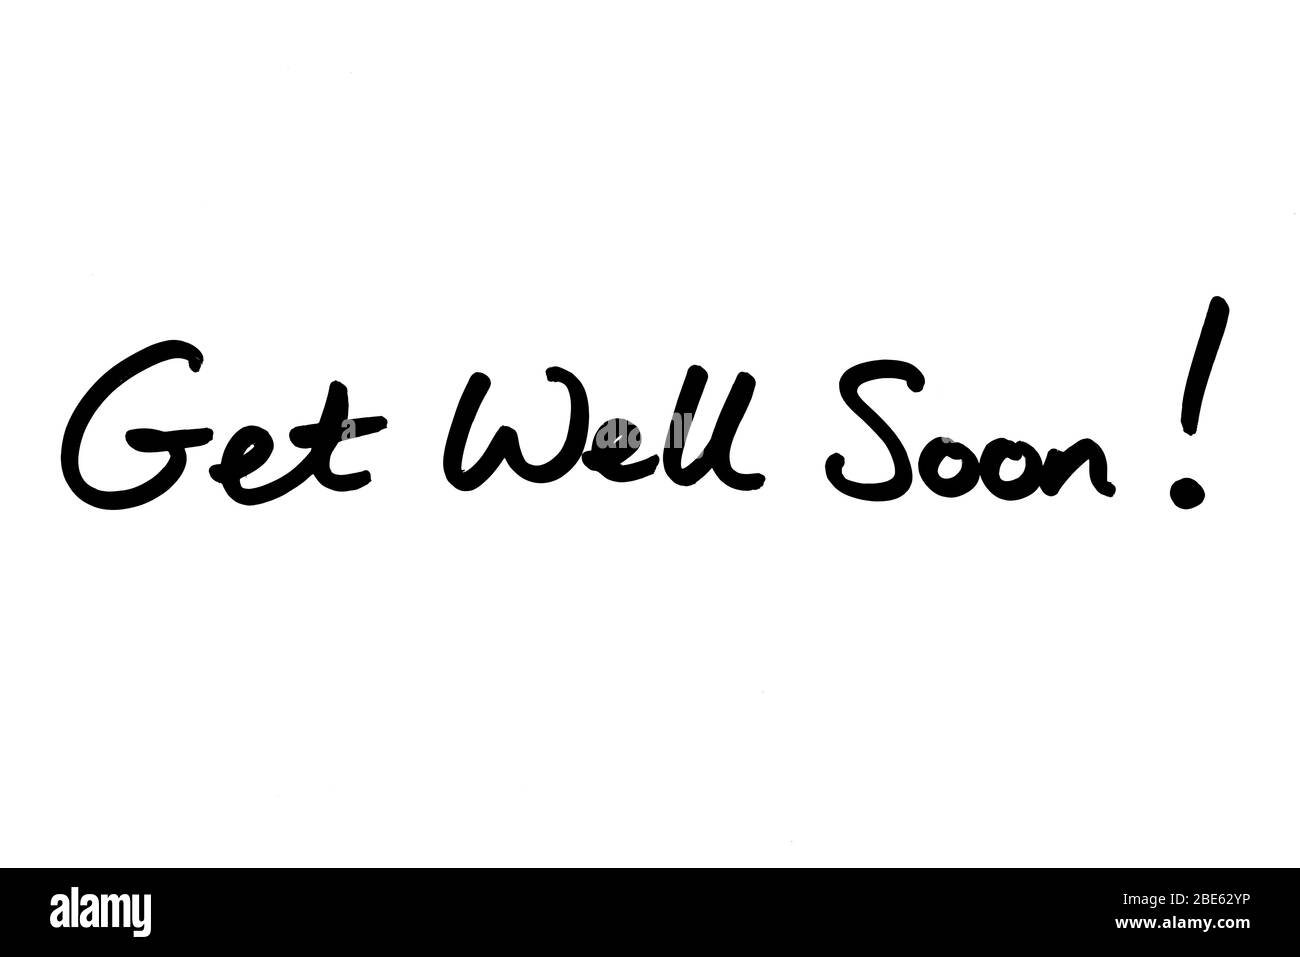 Get Well Soon! handwritten on a white background. Stock Photo